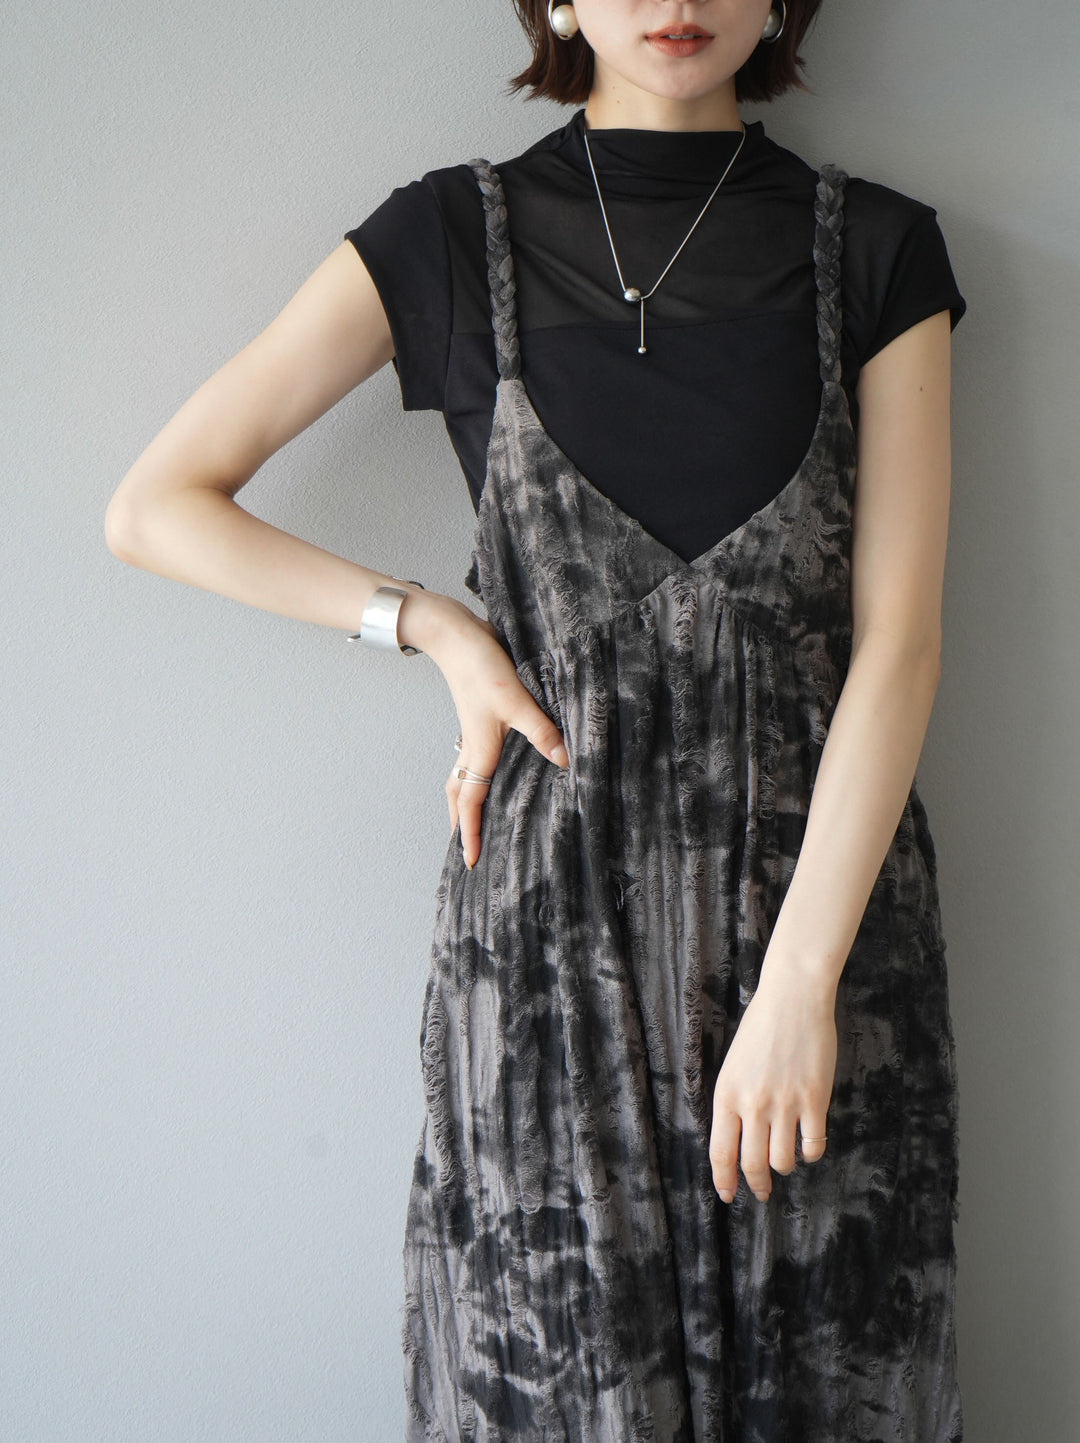 [SET] Damaged nuance pattern braided string camisole dress + selectable accessory set (2 sets)